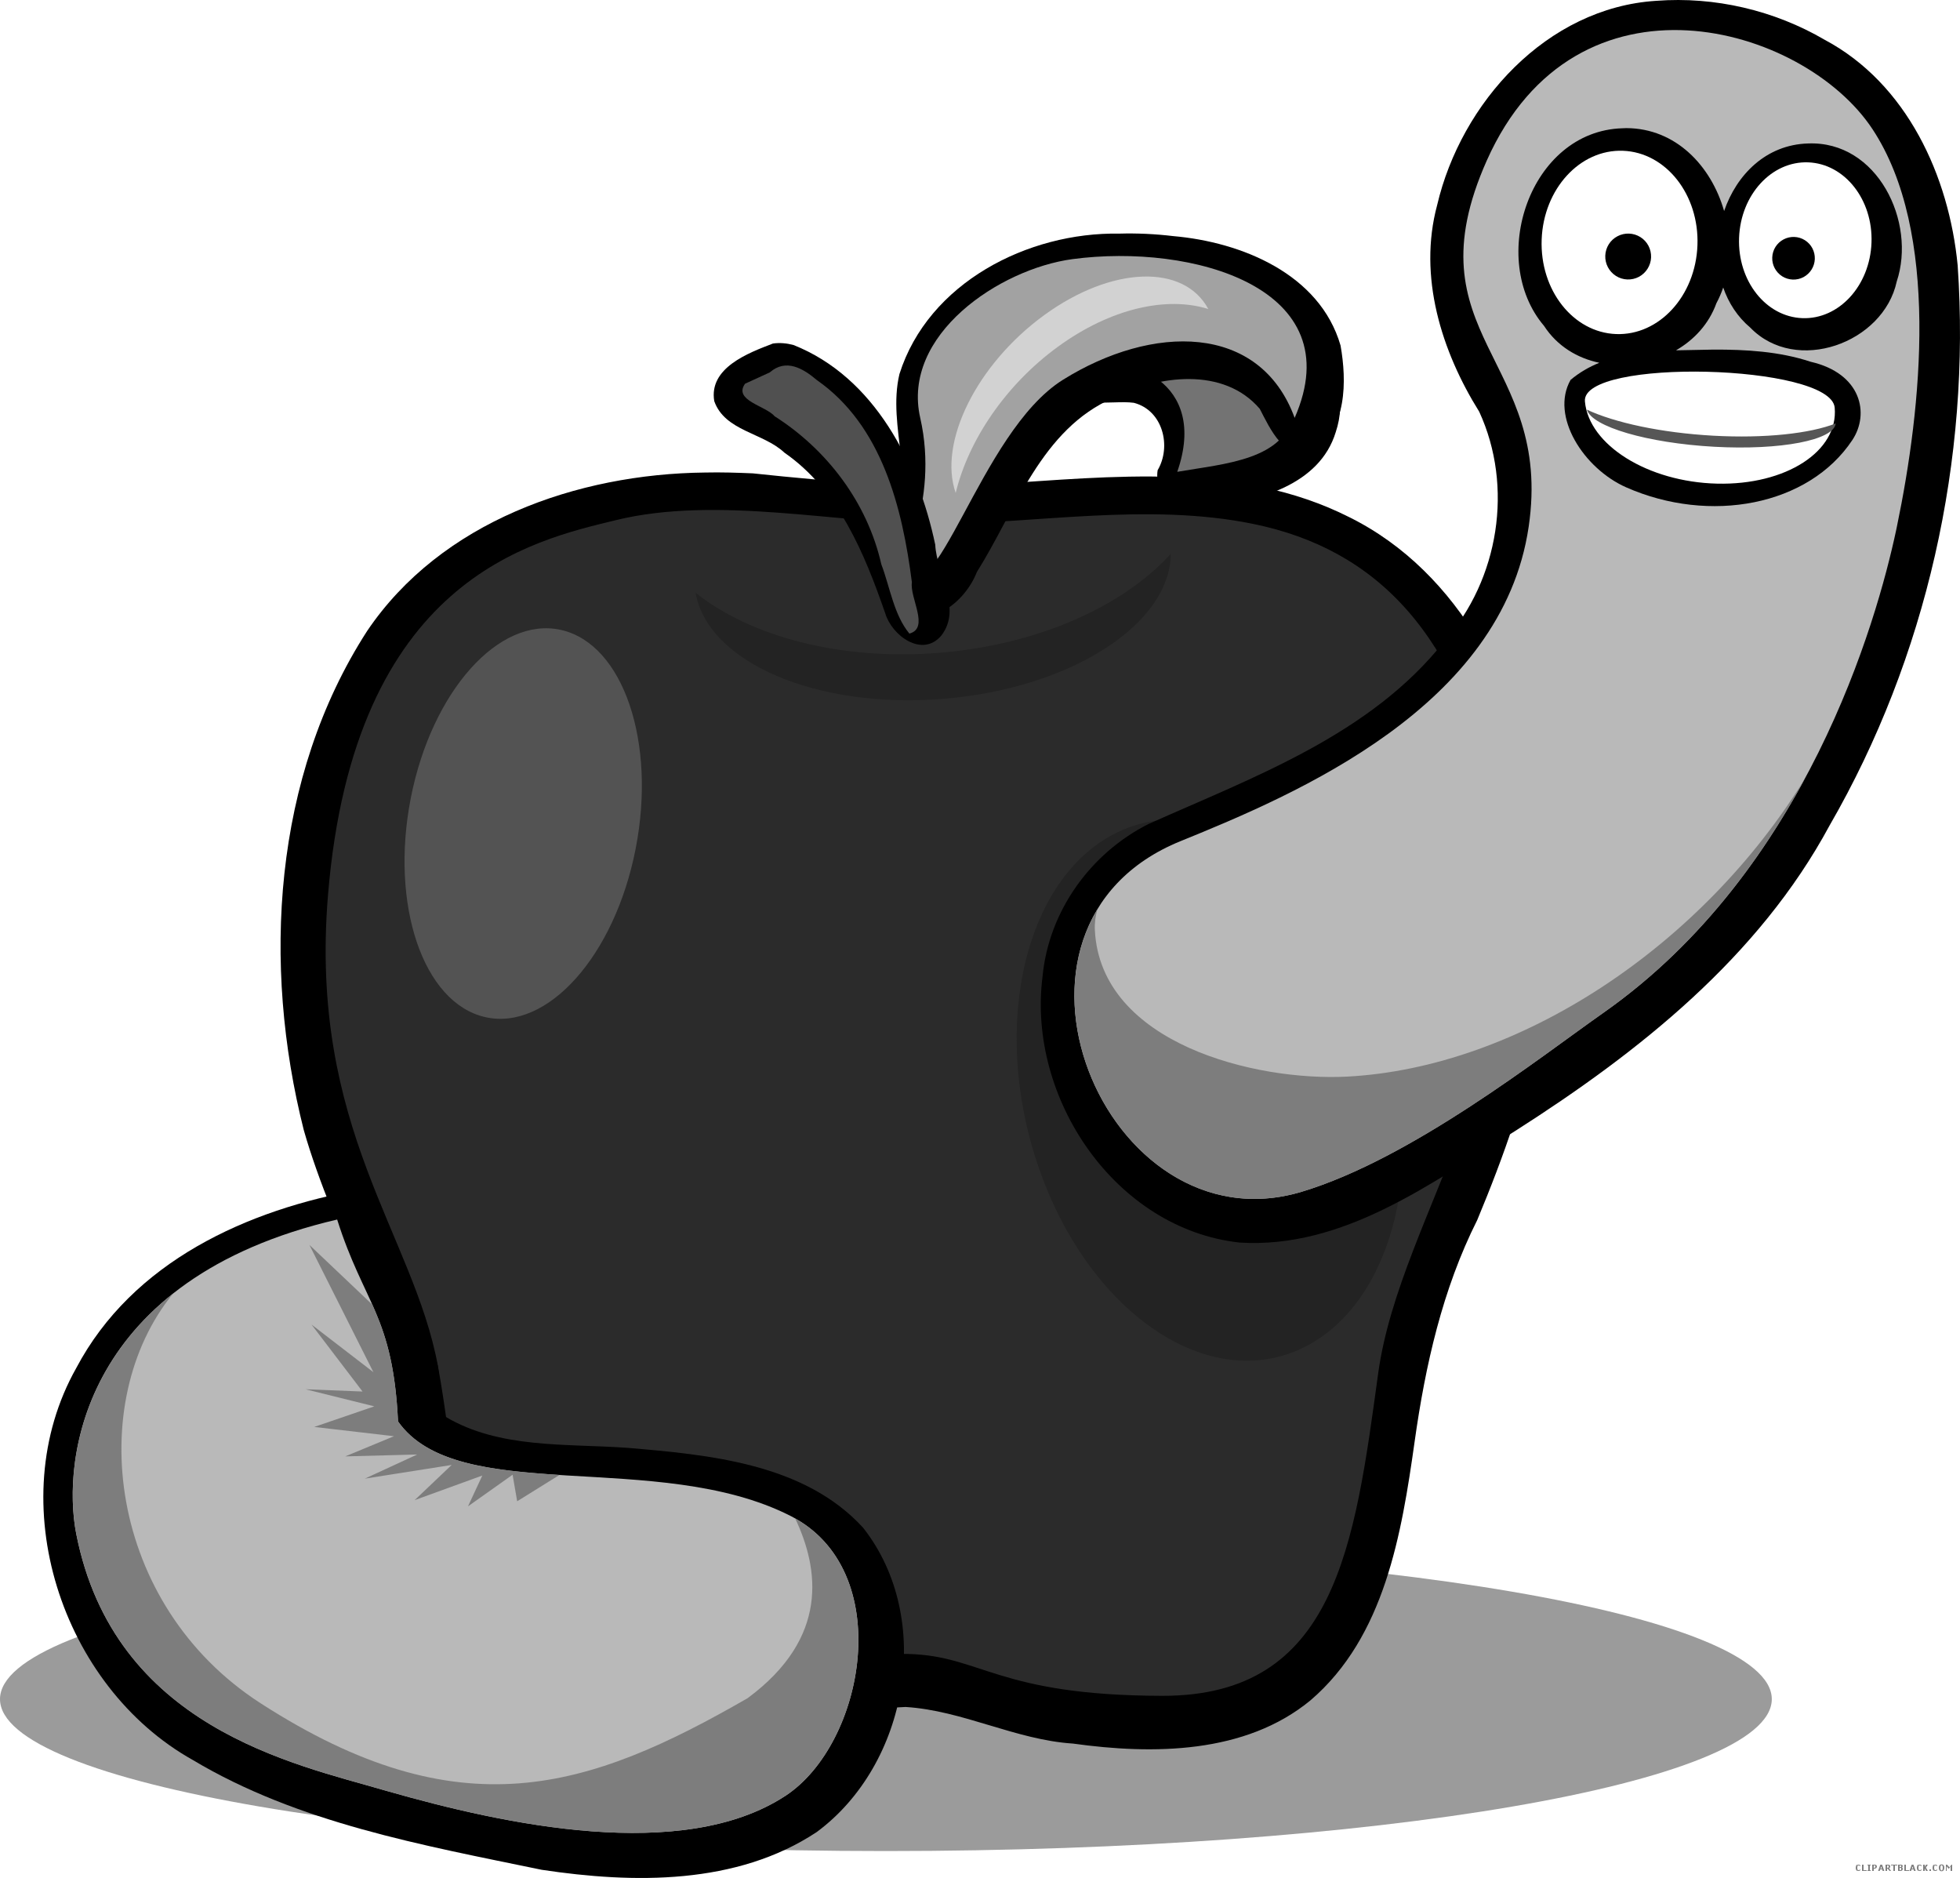 Worm clipart apple. Gummy free on dumielauxepices